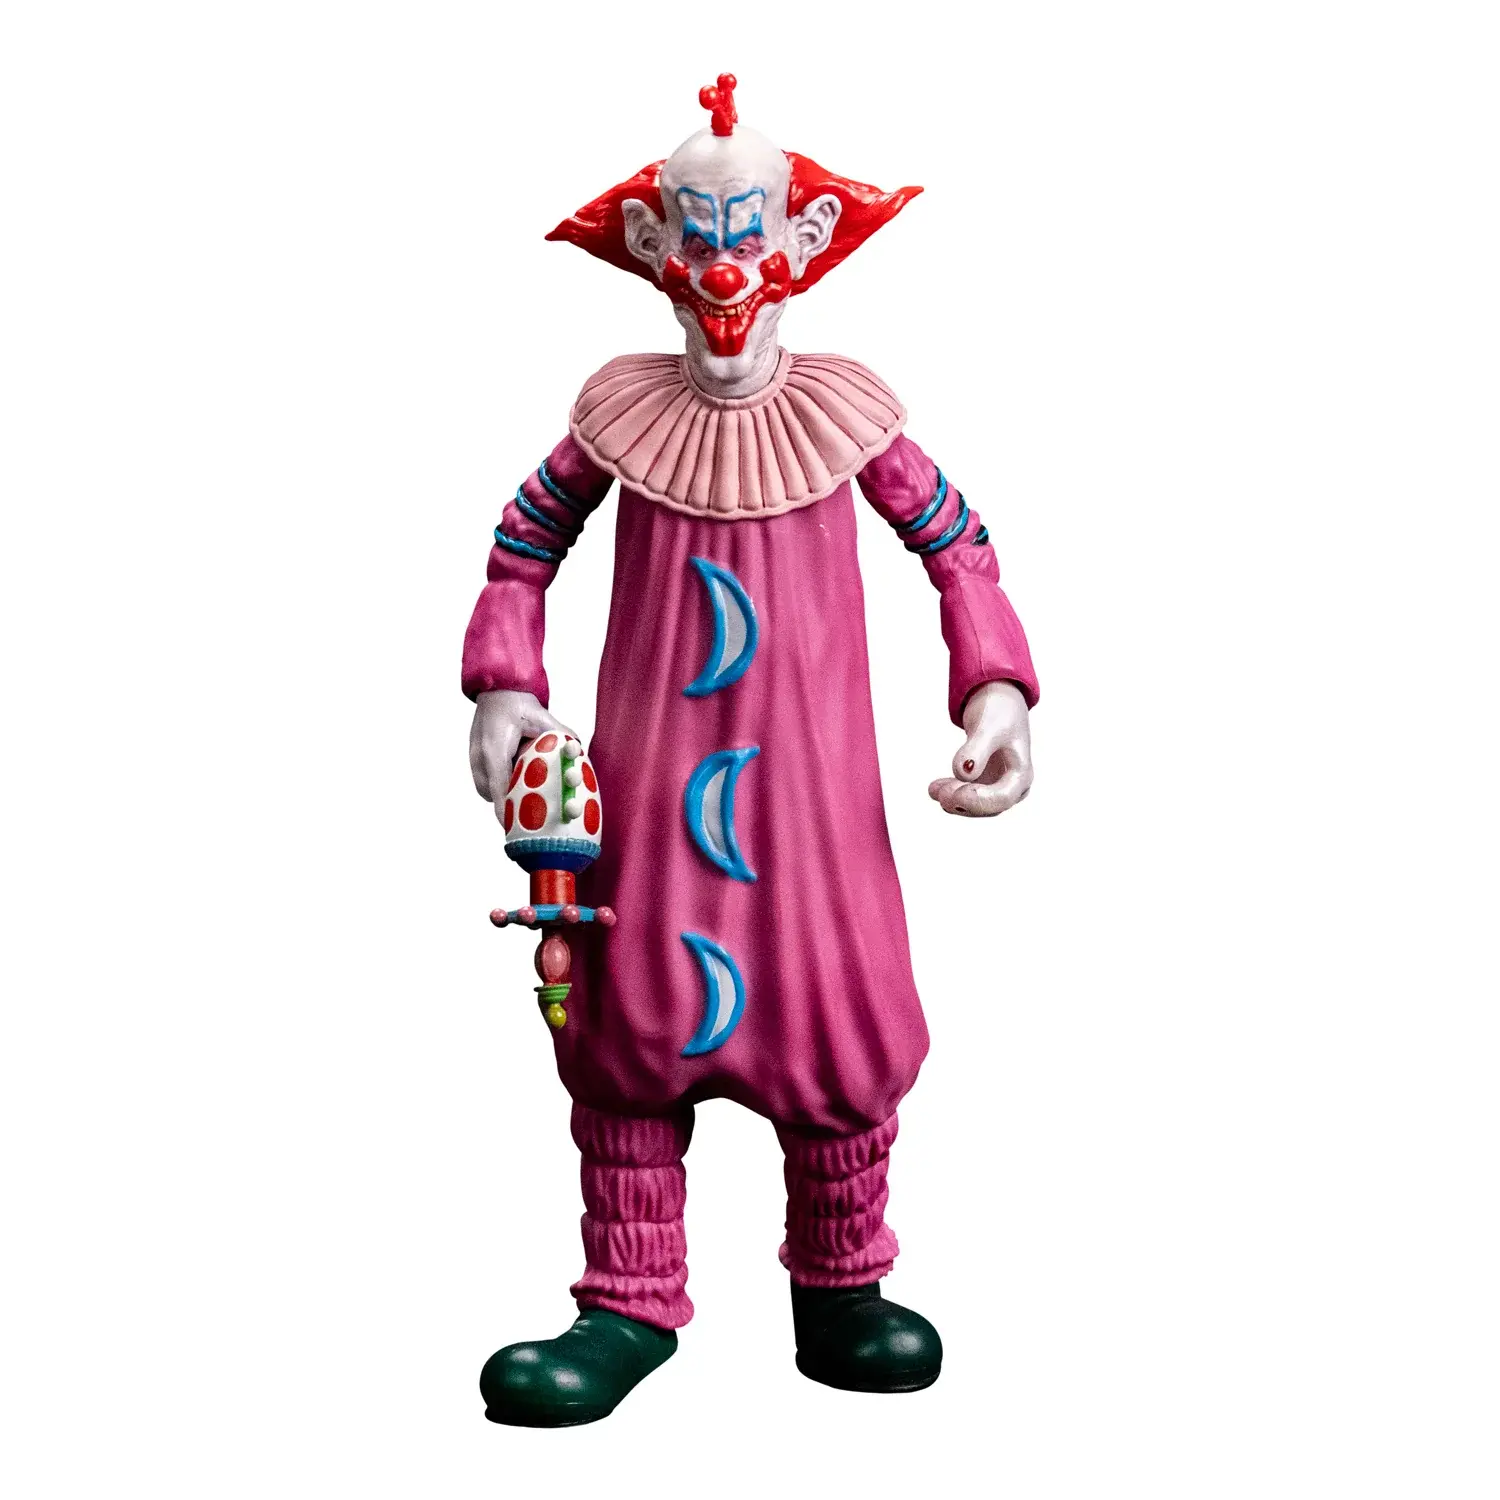 Scream Greats Killer Klowns From Outer Space - Slim 8" Figure